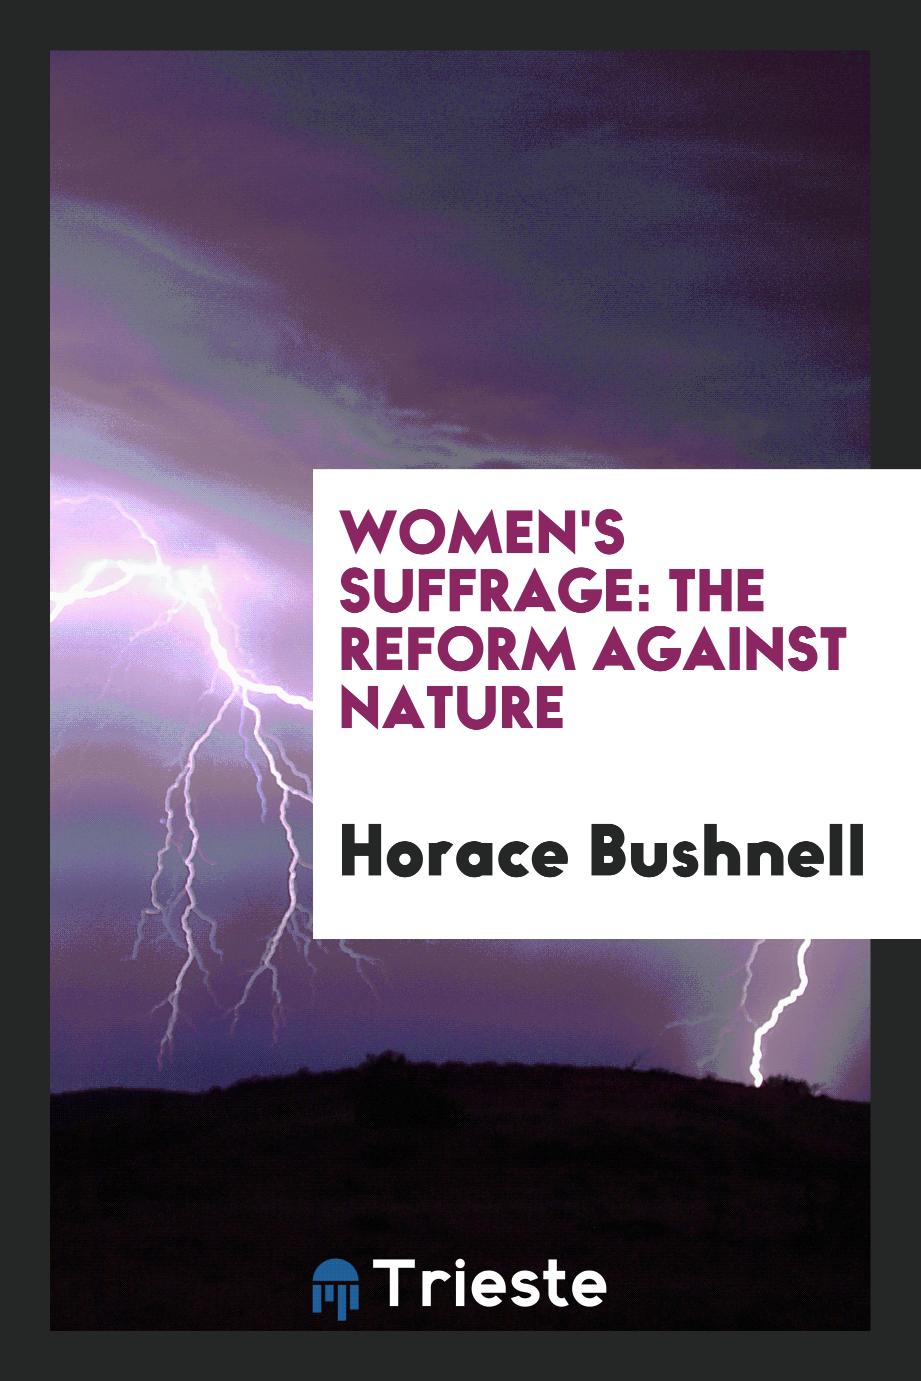 Women's Suffrage: The Reform Against Nature